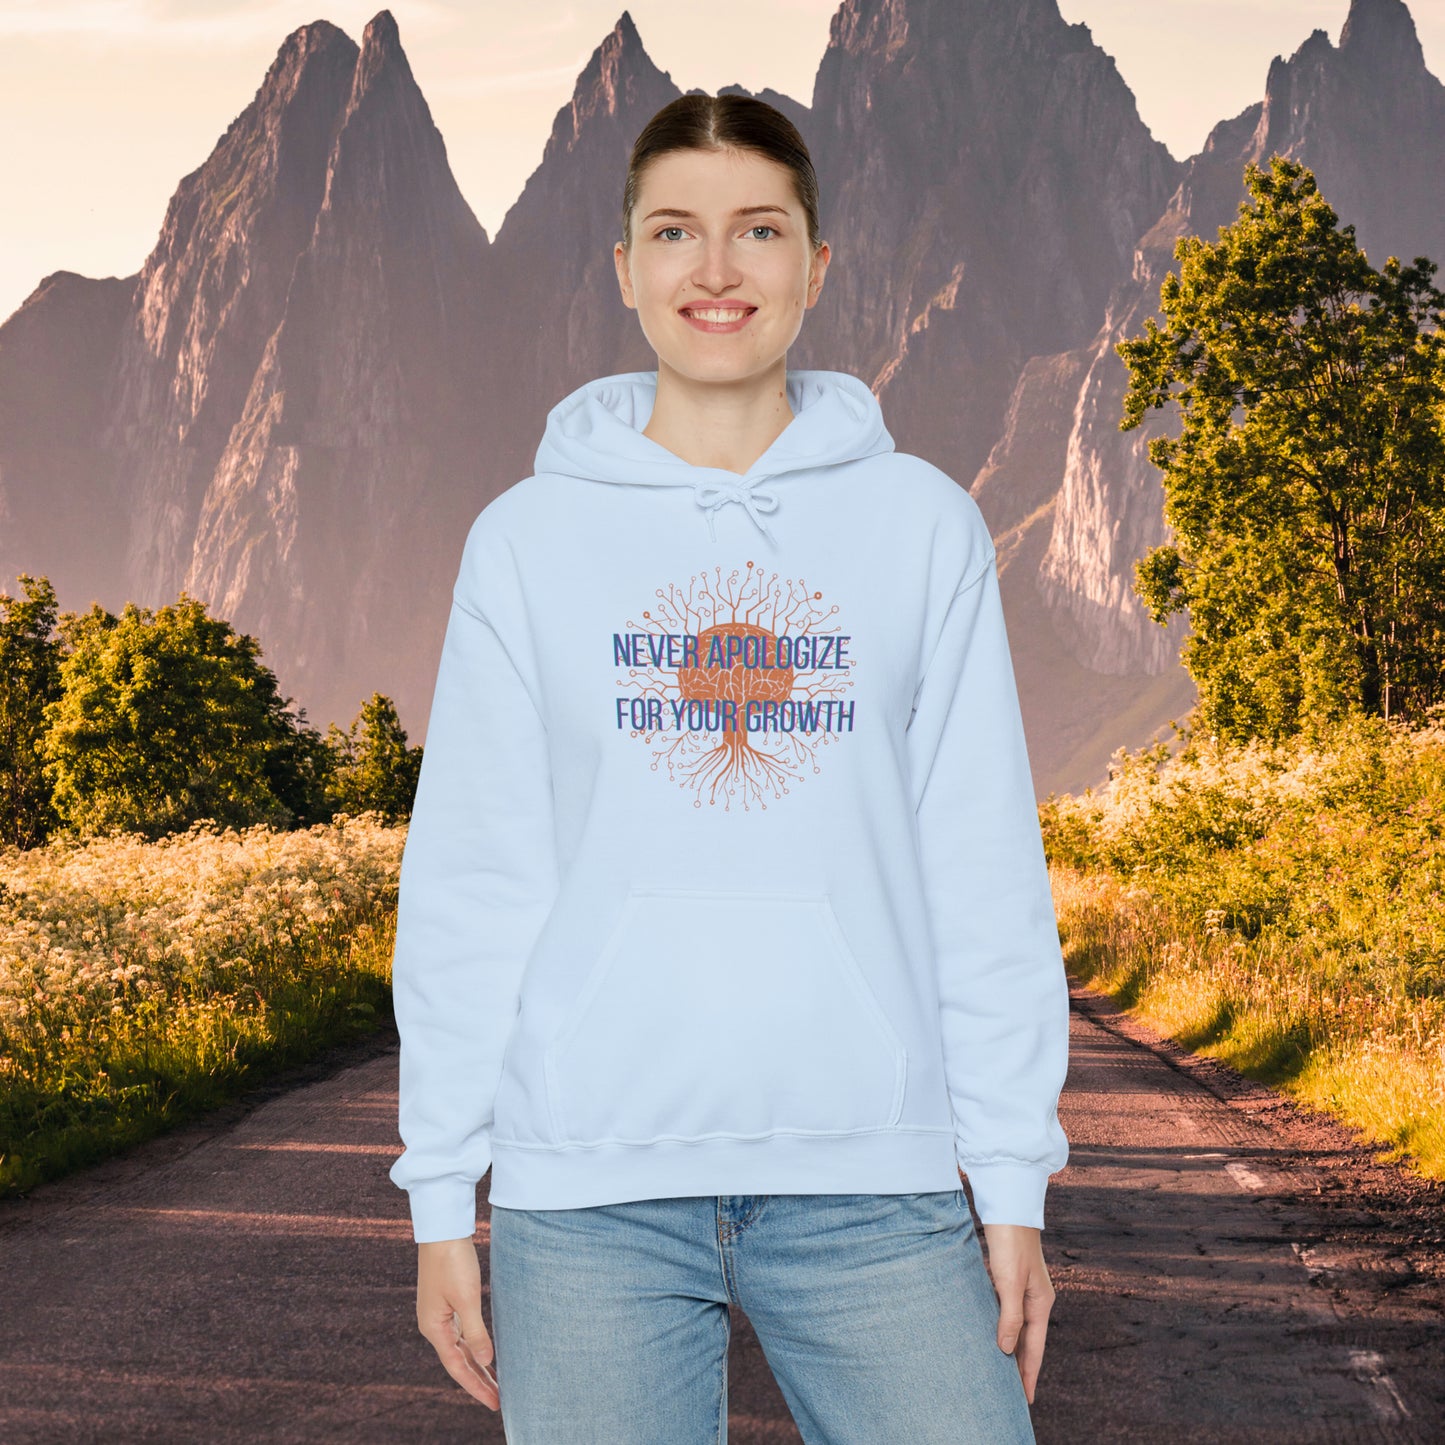 Never apologize for your growth message on this Unisex Heavy Blend™ Hooded Sweatshirt